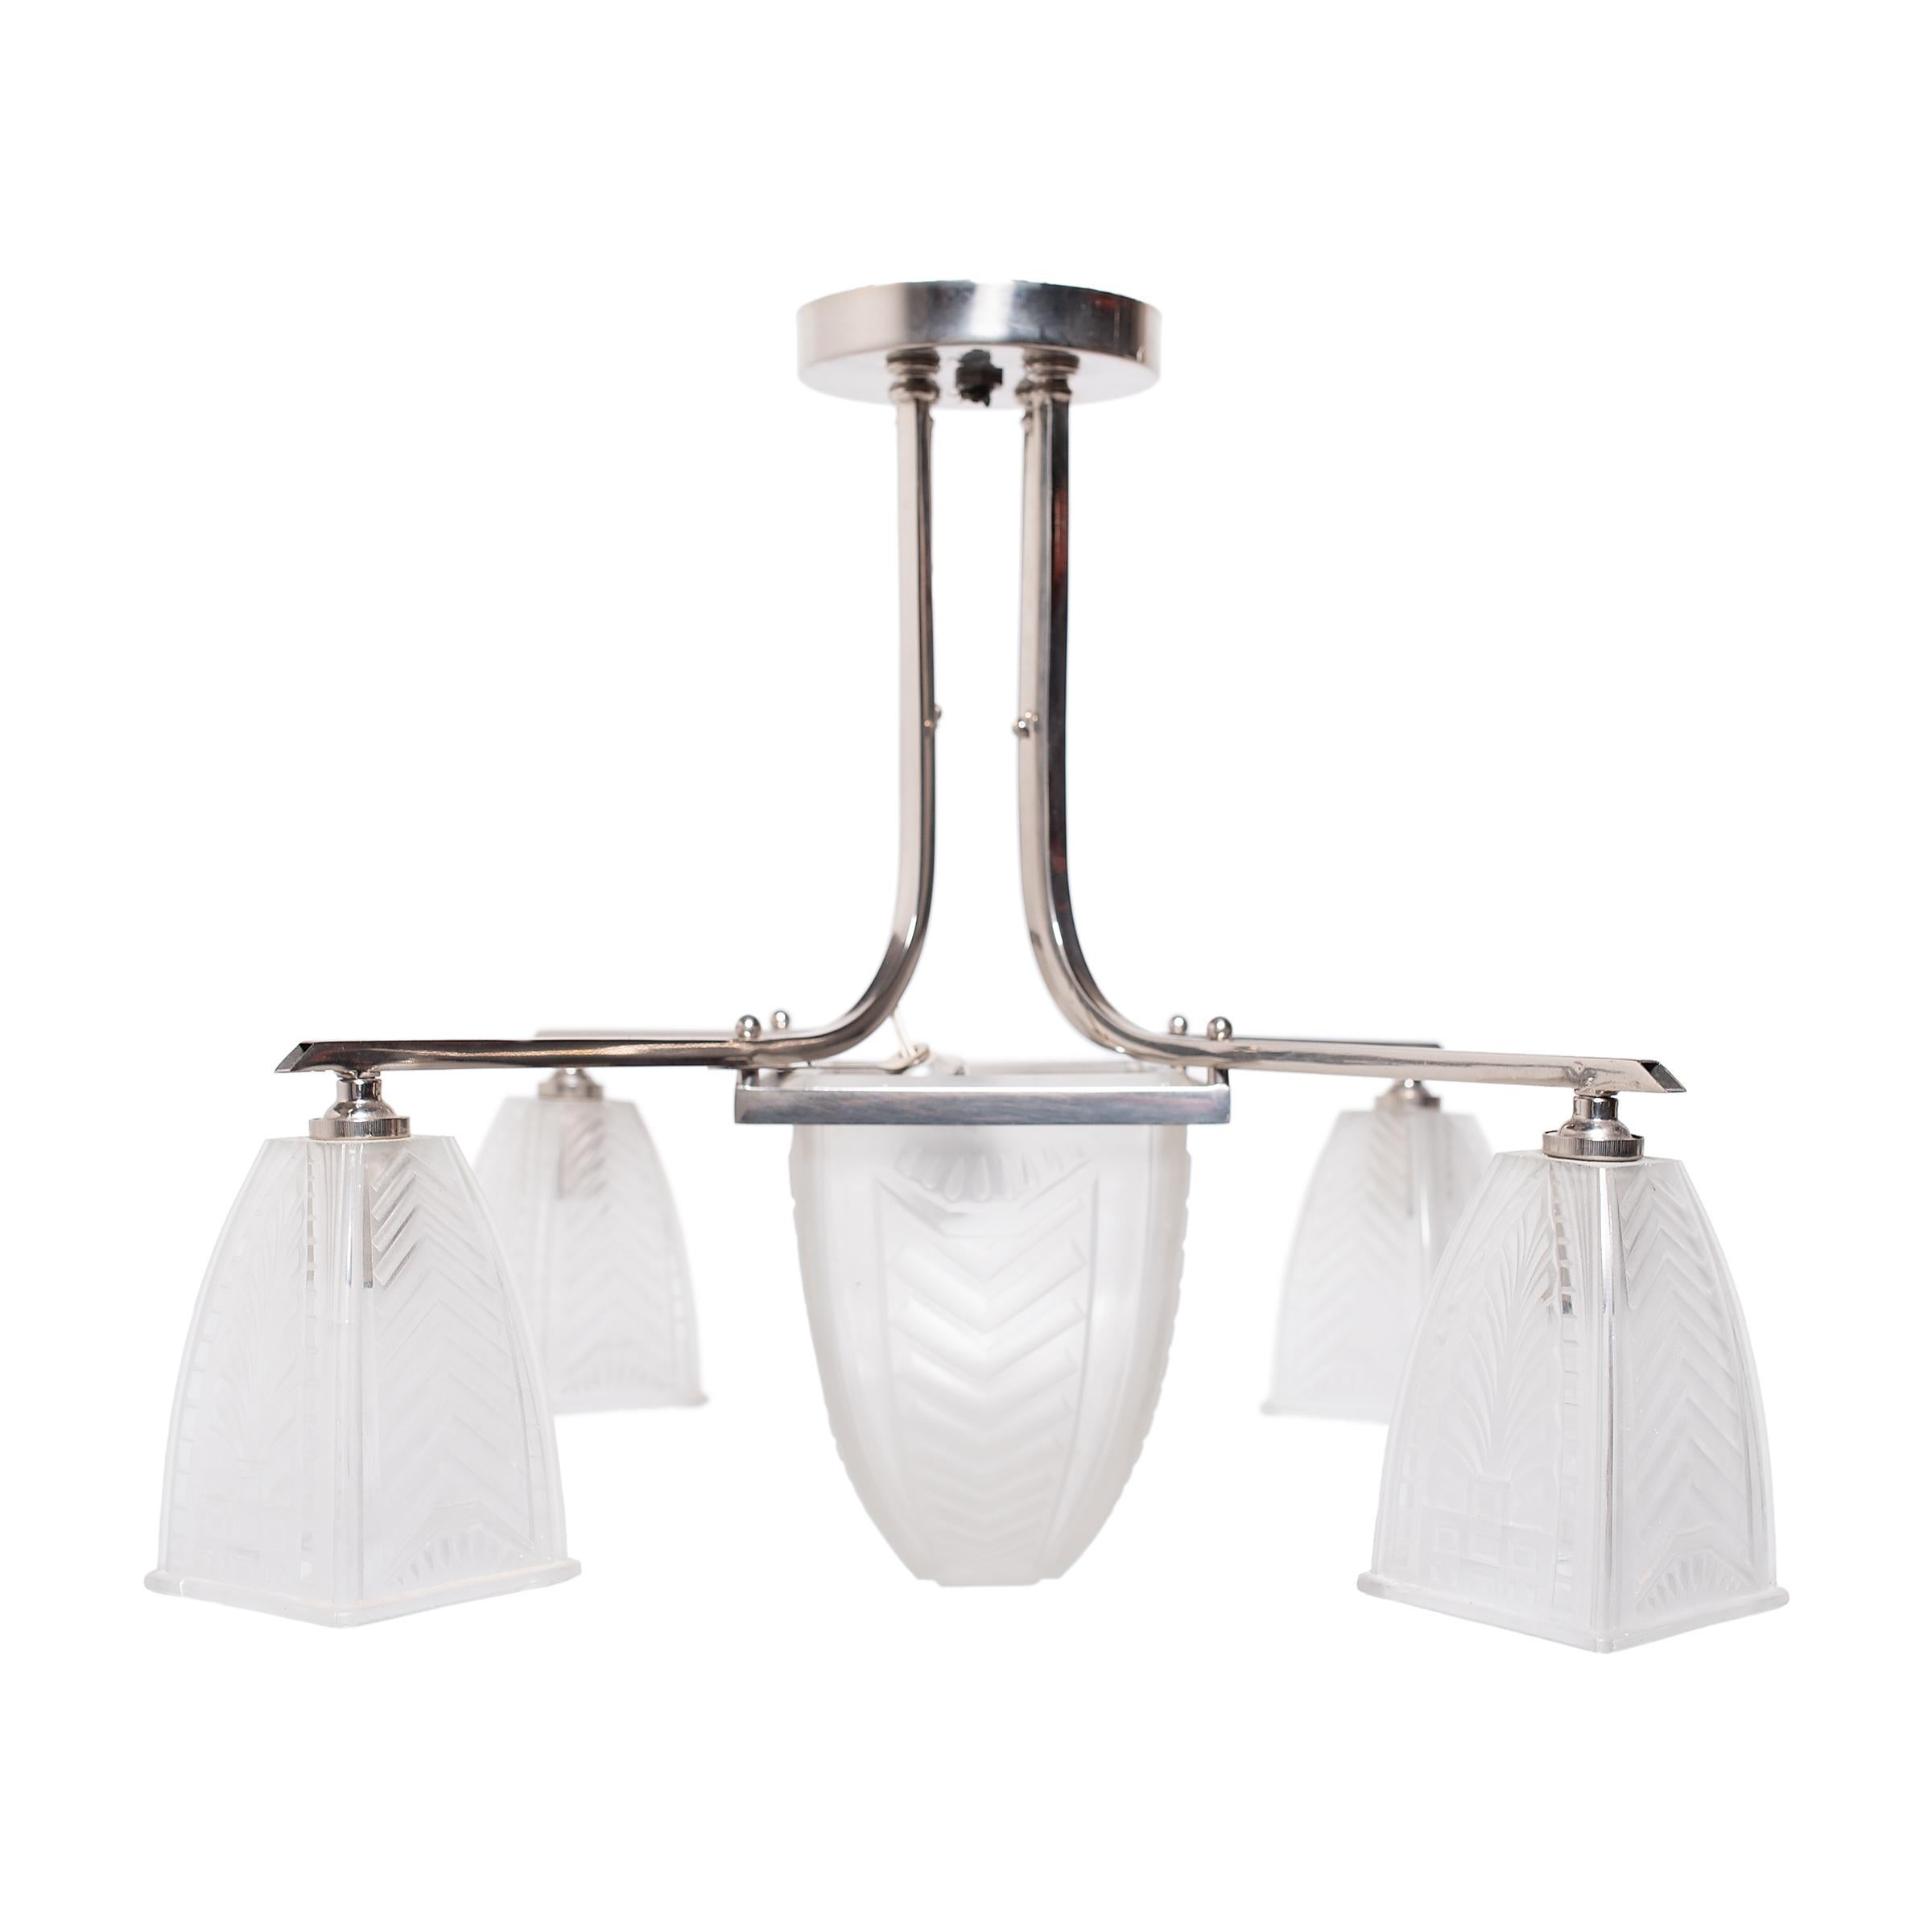 This elegant five-light chandelier exemplifies French Art Deco lighting with a sculptural form, metallic sheen, and a soft, delicate appearance. The large pendant features a nickel-plated metal frame and clear frosted molded-glass shades with